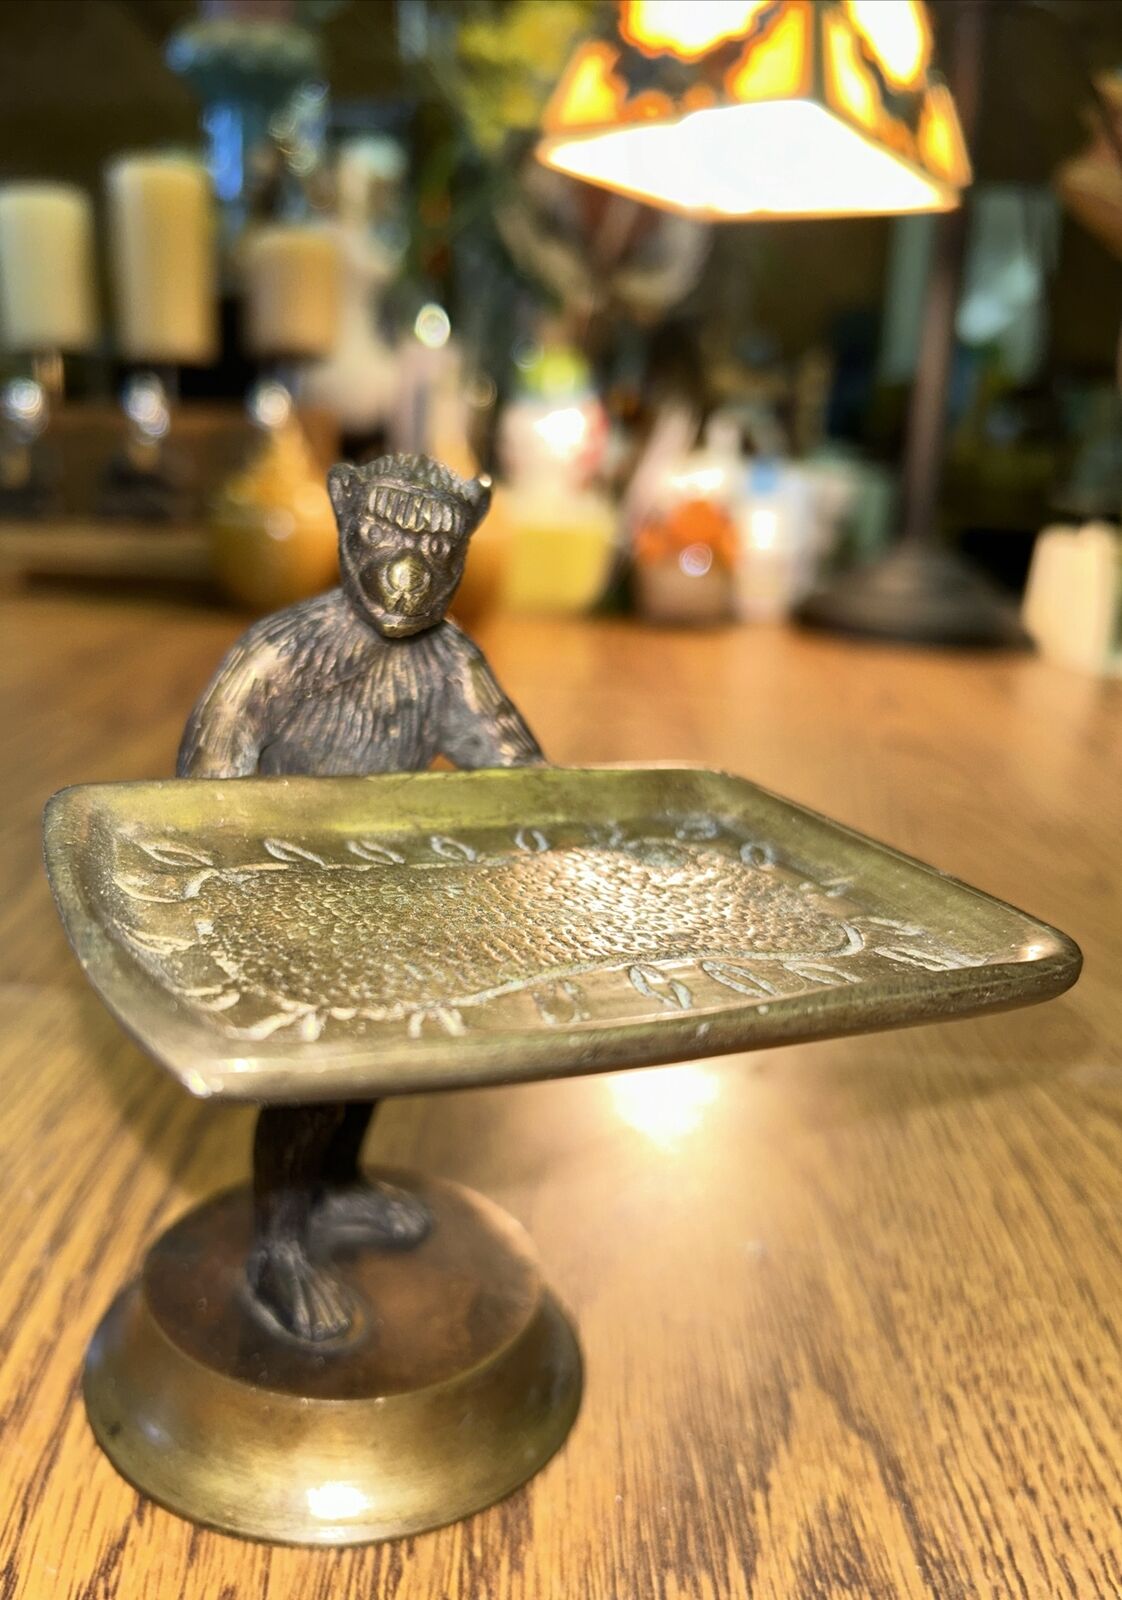 Antique Brass Monkey Holding Tray Business Card Holder - 5” tall